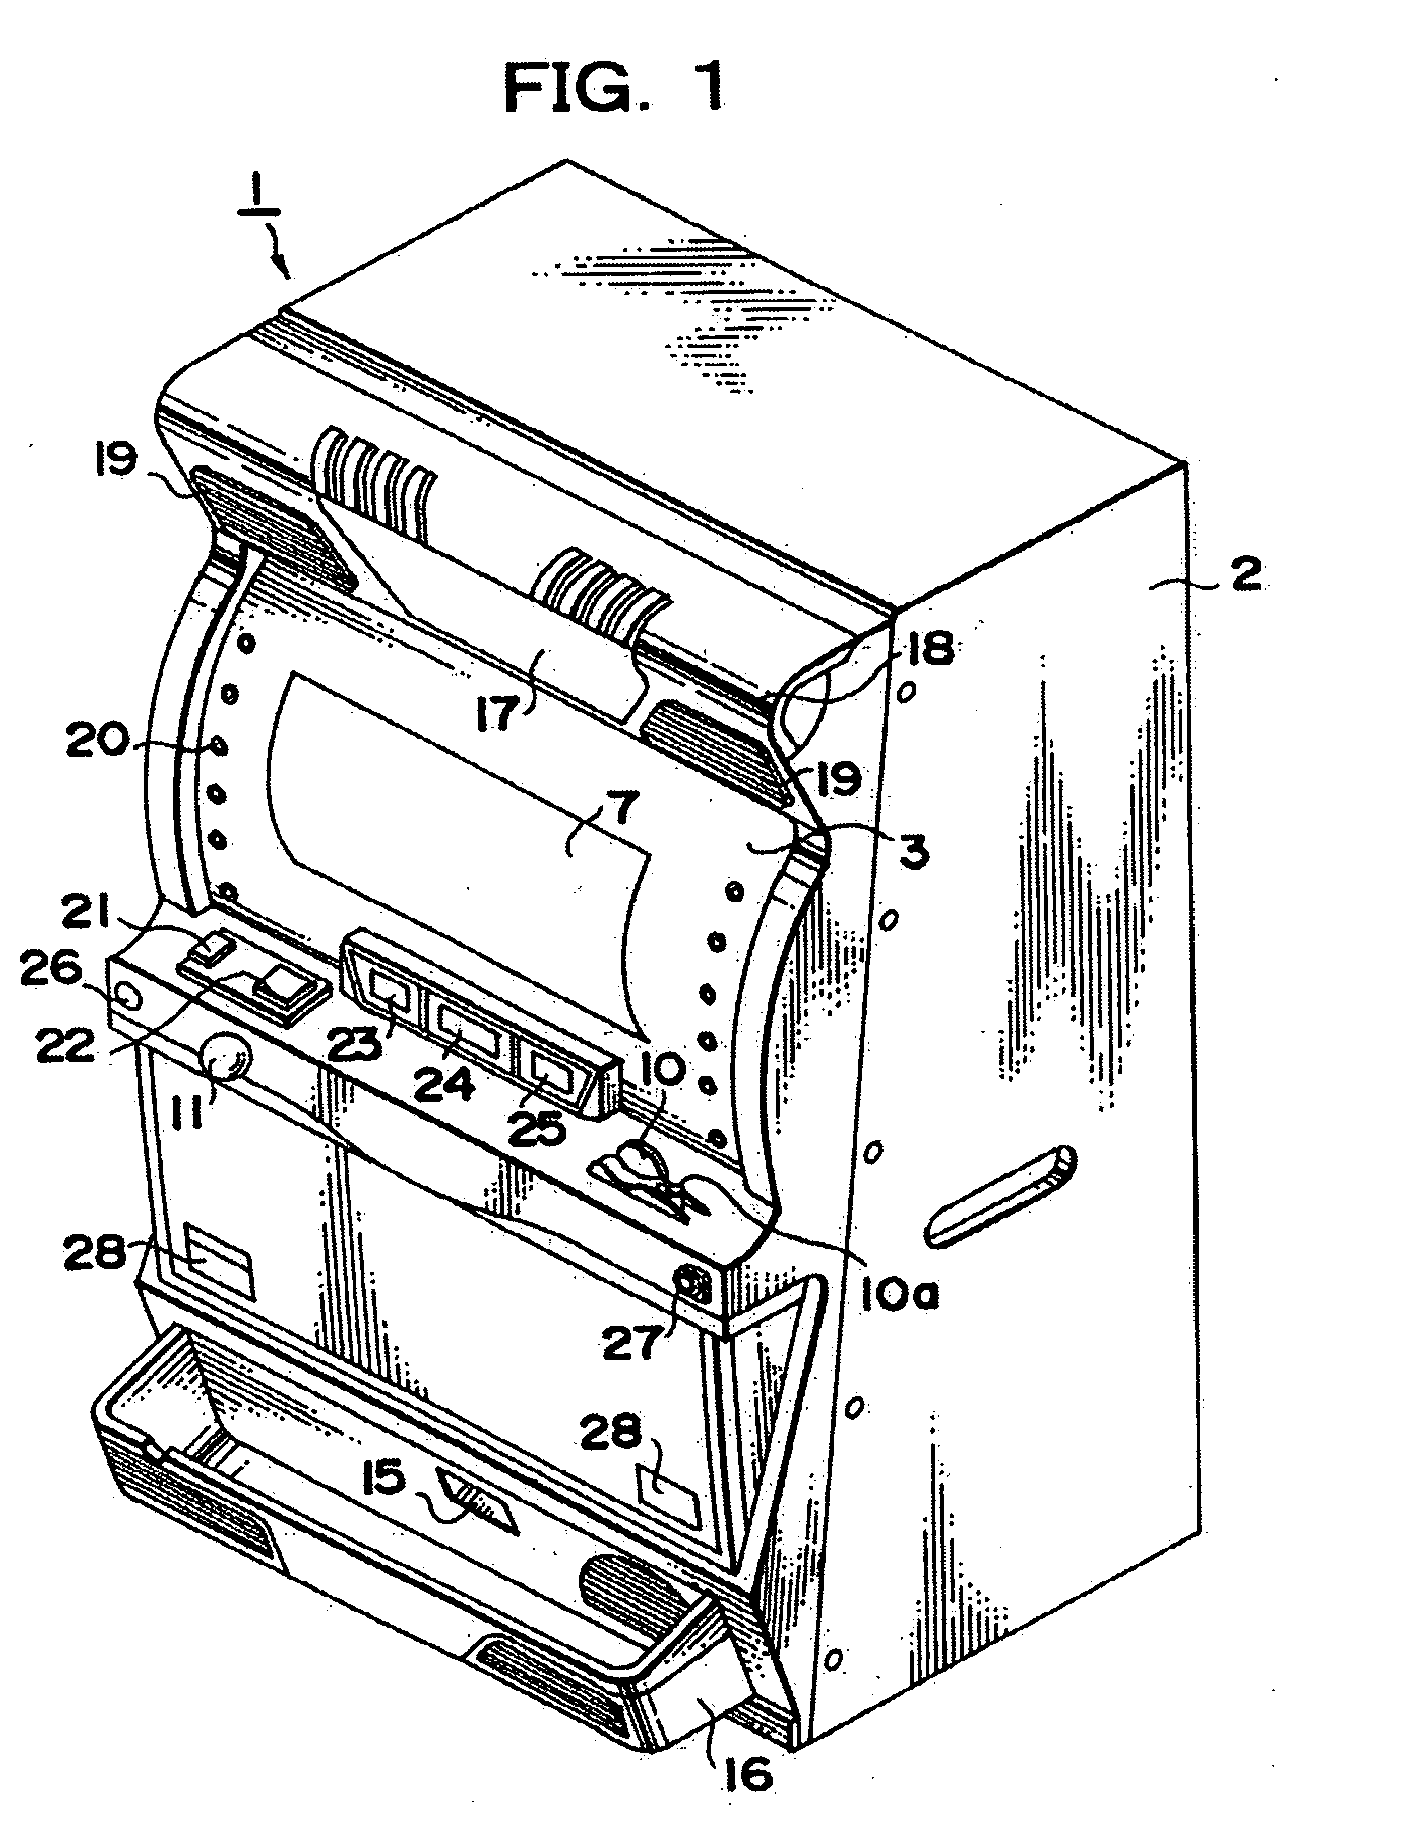 Gaming device for determining a re-drawing group for following games